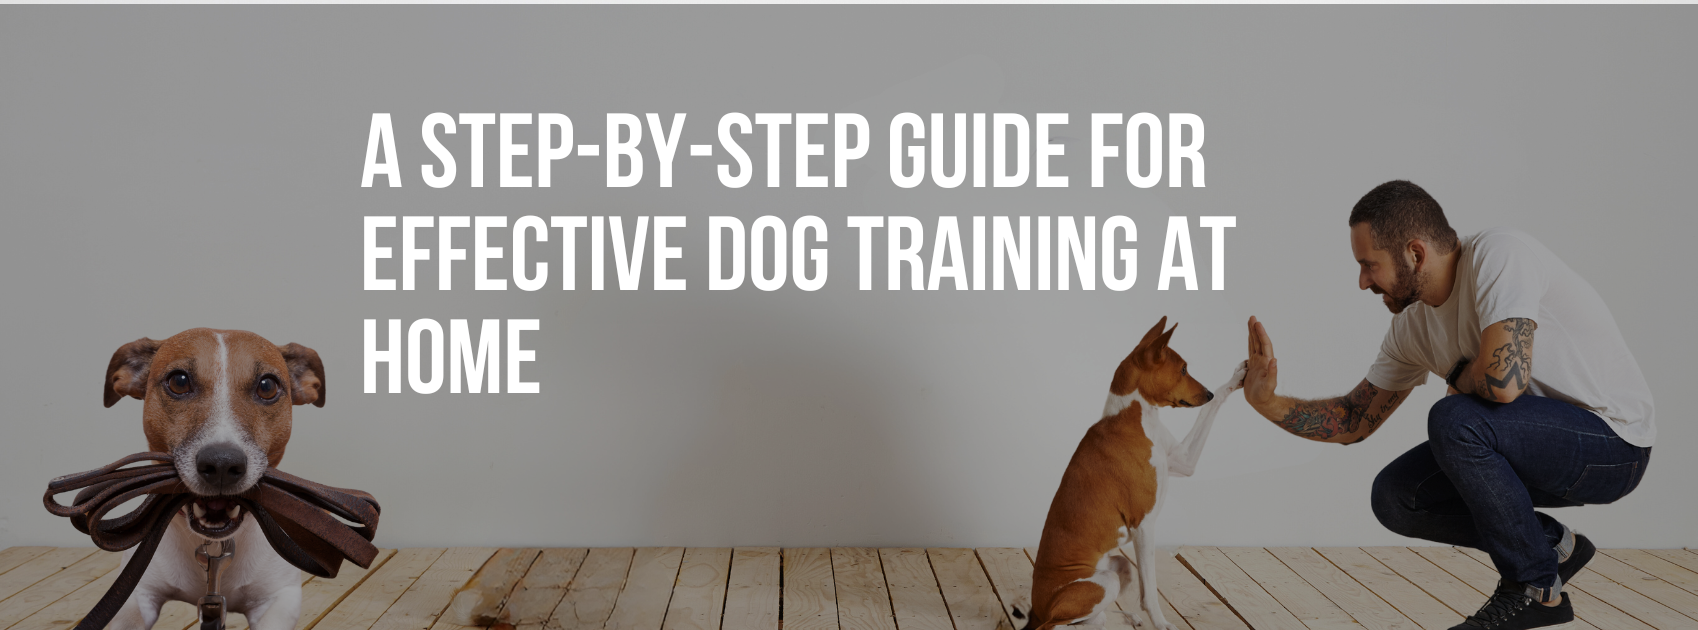 A Step-By-Step Guide for Effective Dog Training At Home